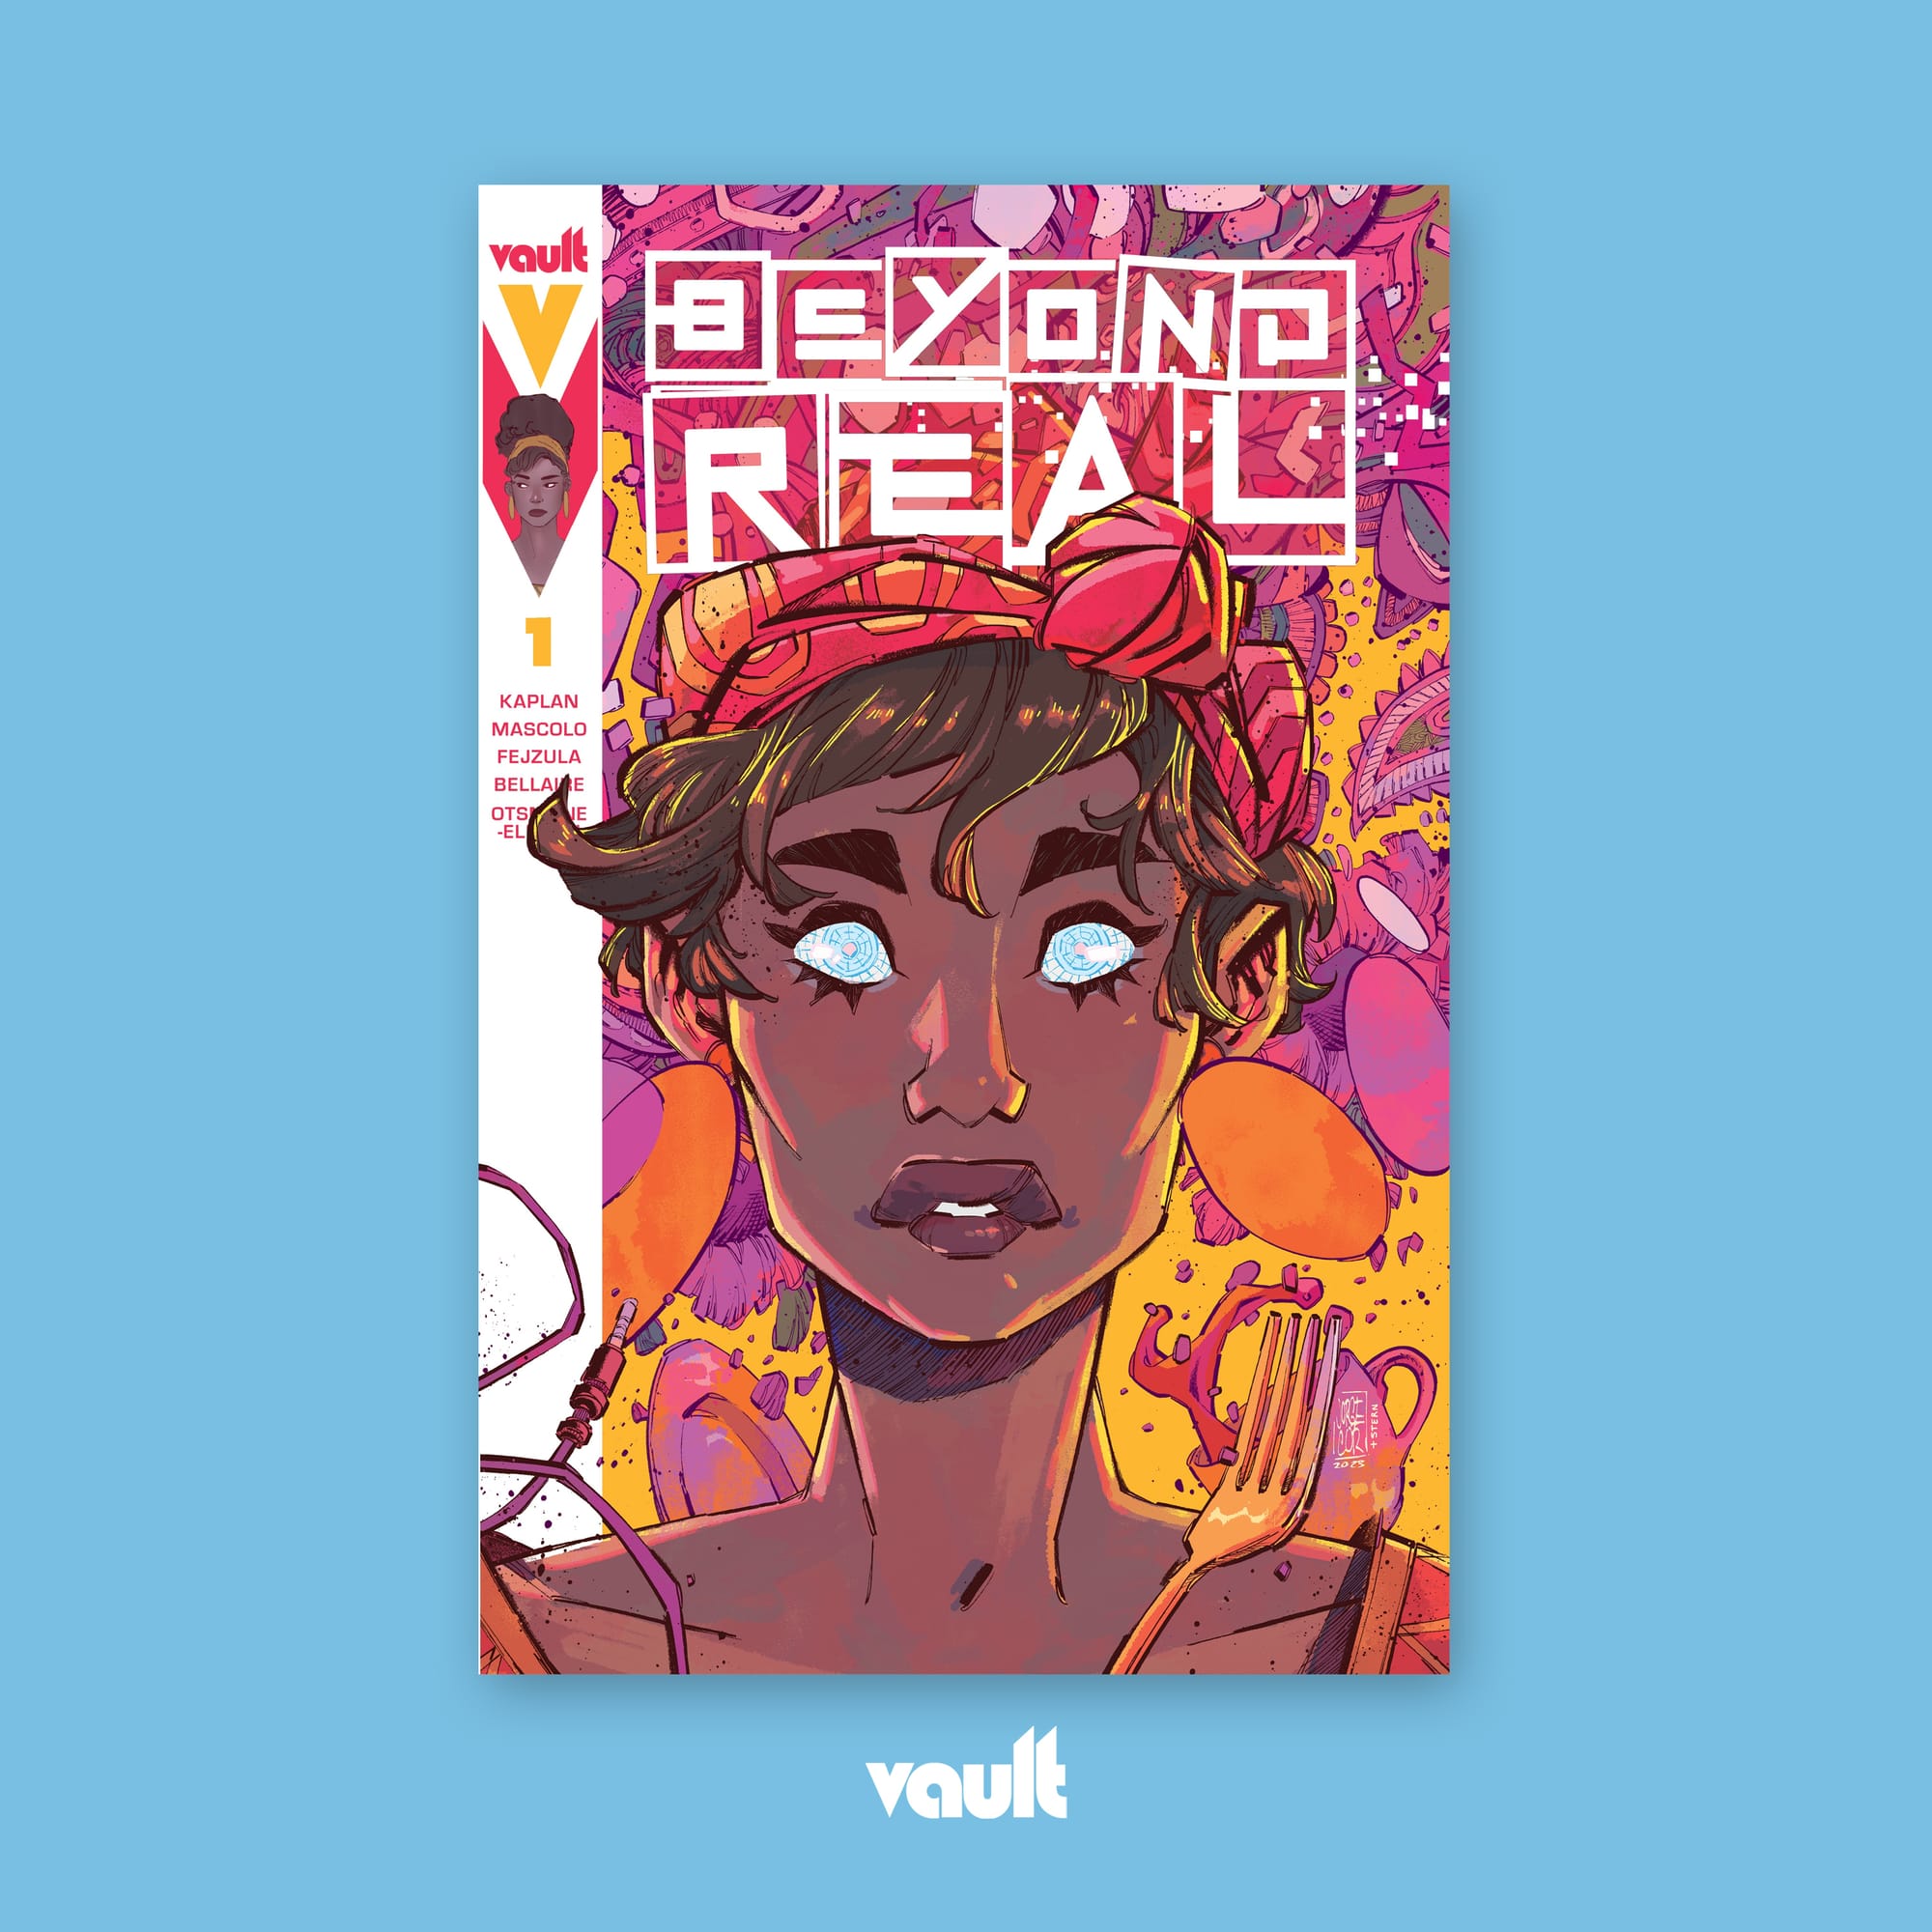 Beyond Real #1 Received Over 100,000 Orders